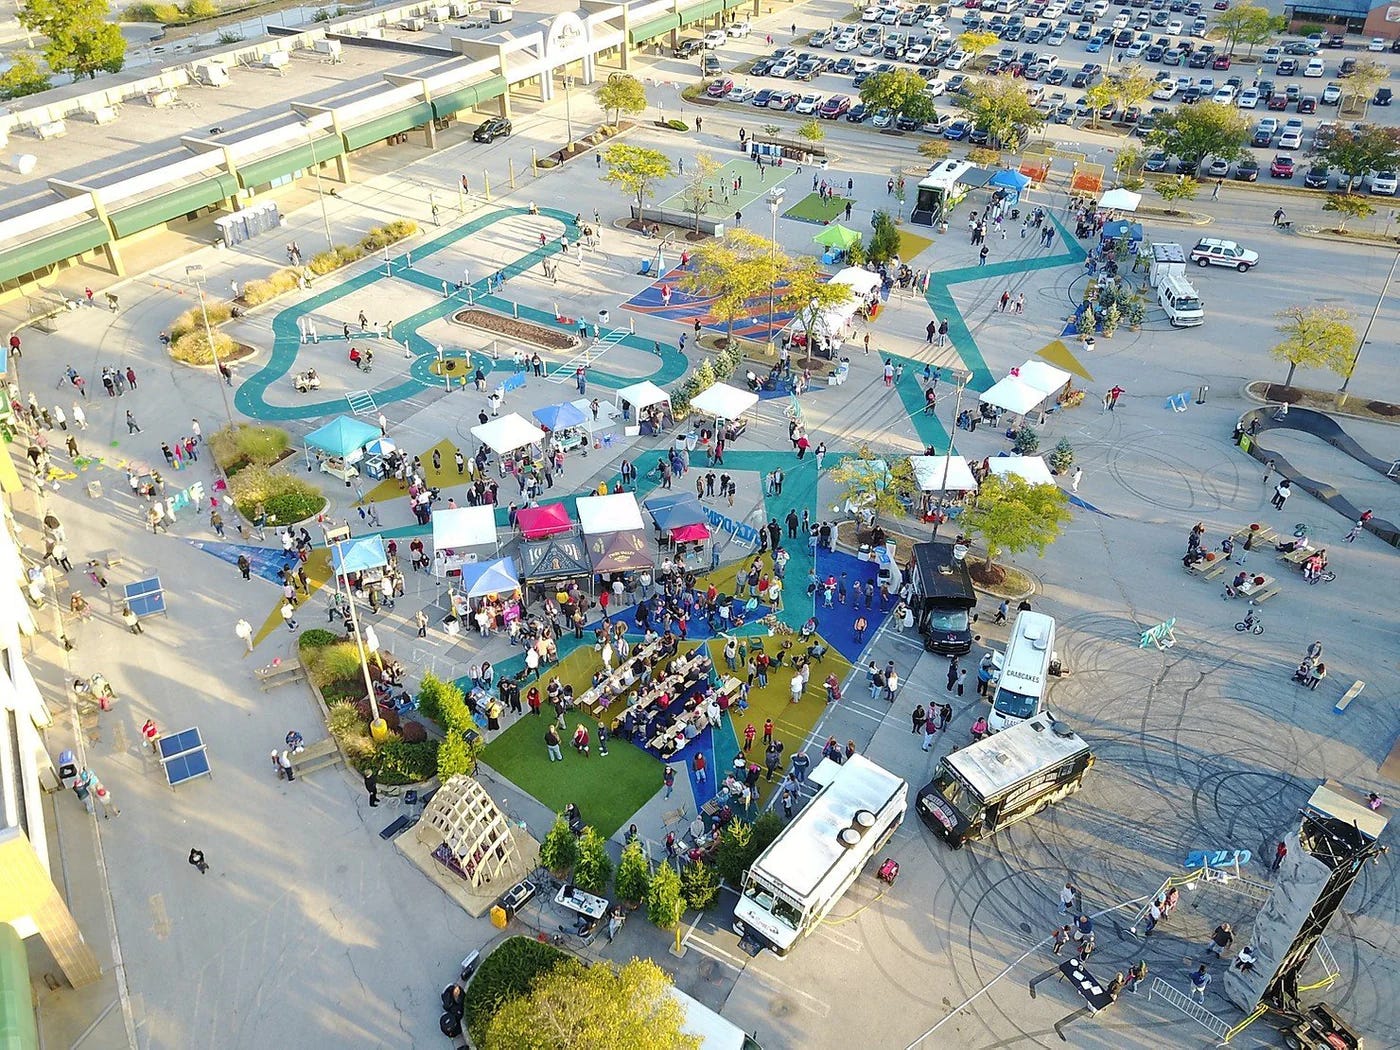 An overhead shot of a giant parking lot, into which Better Block have painted bike paths, kiosks and tents for play, temporary turf and picnic tables.